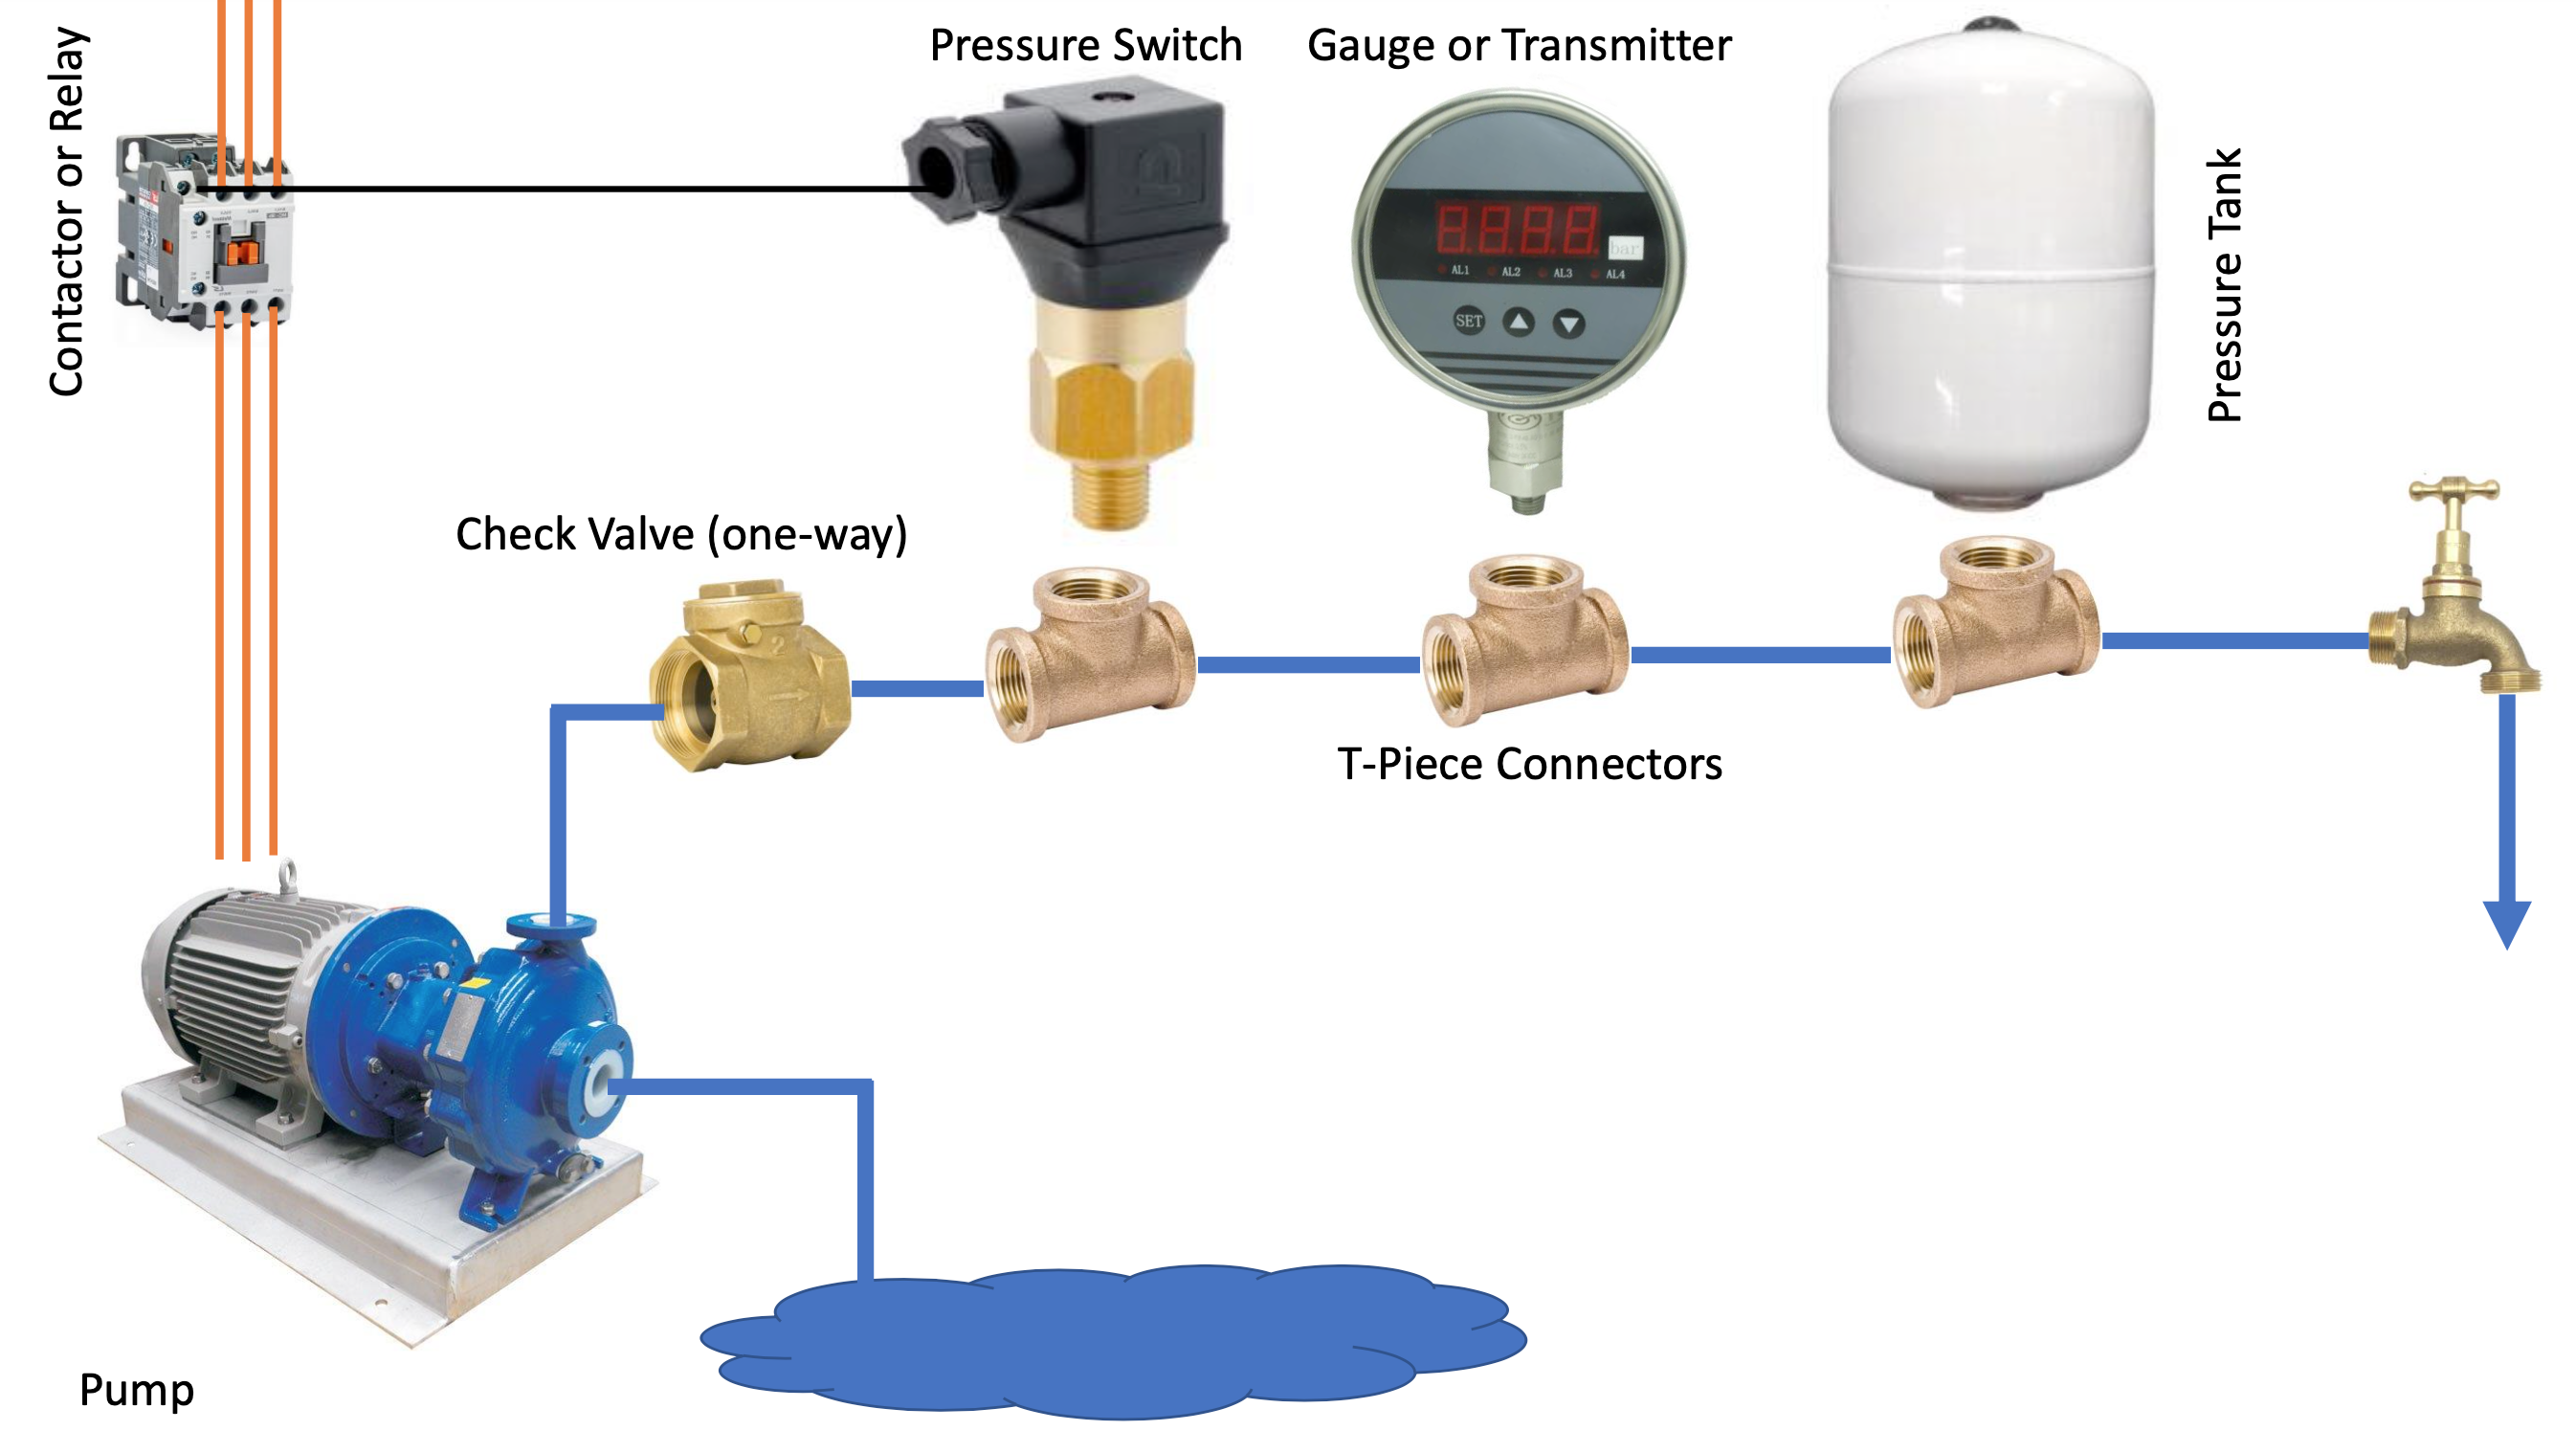 Pressure switches for water pumps